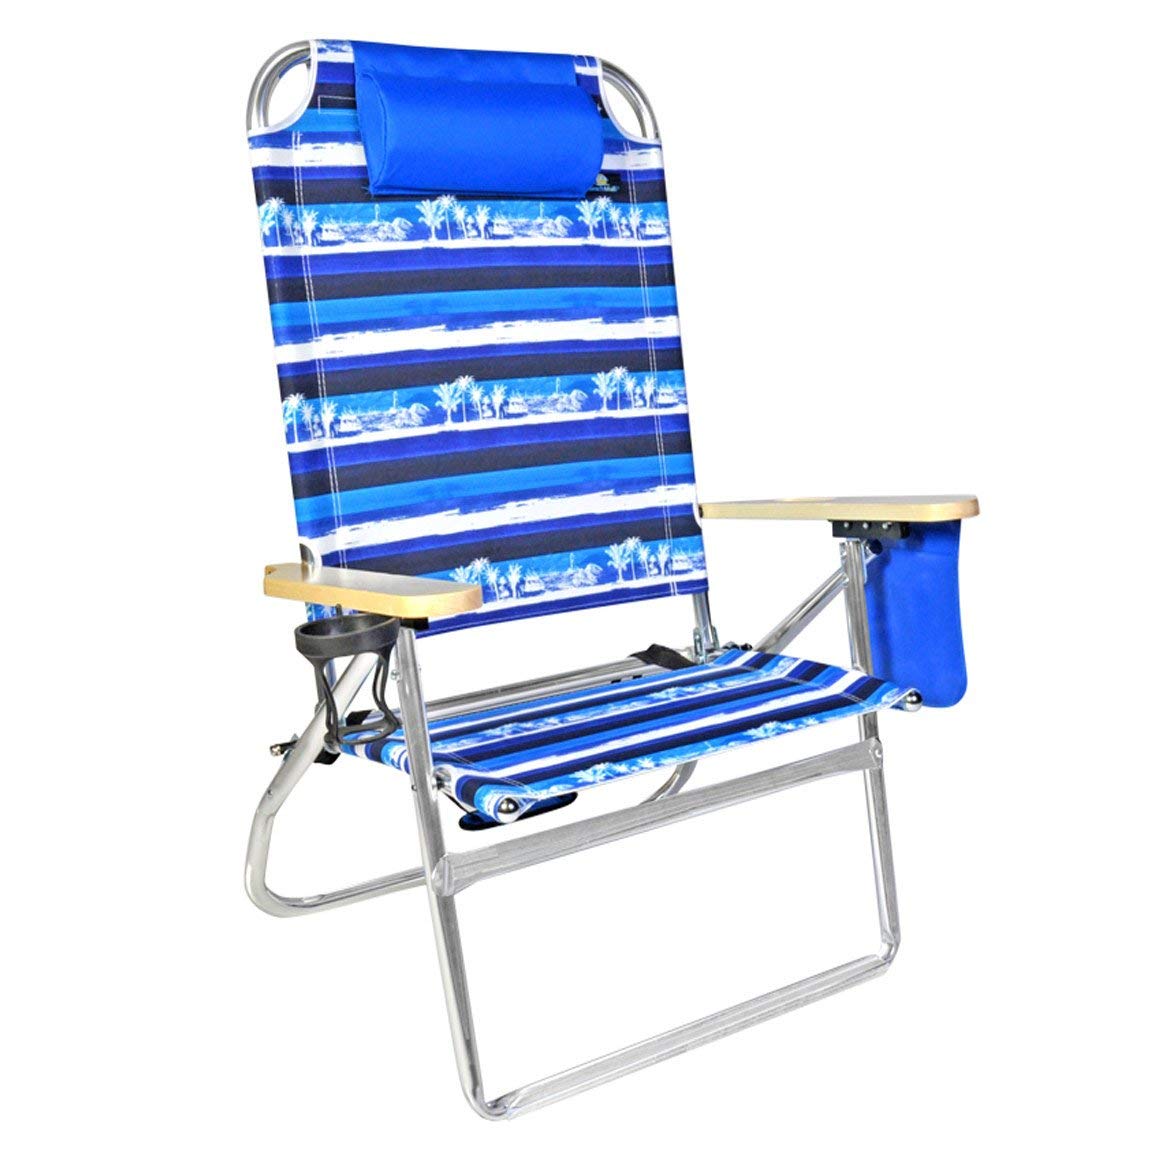 Extra Large - High Seat Heavy Duty 4 Position Beach Chair w/Drink Holder